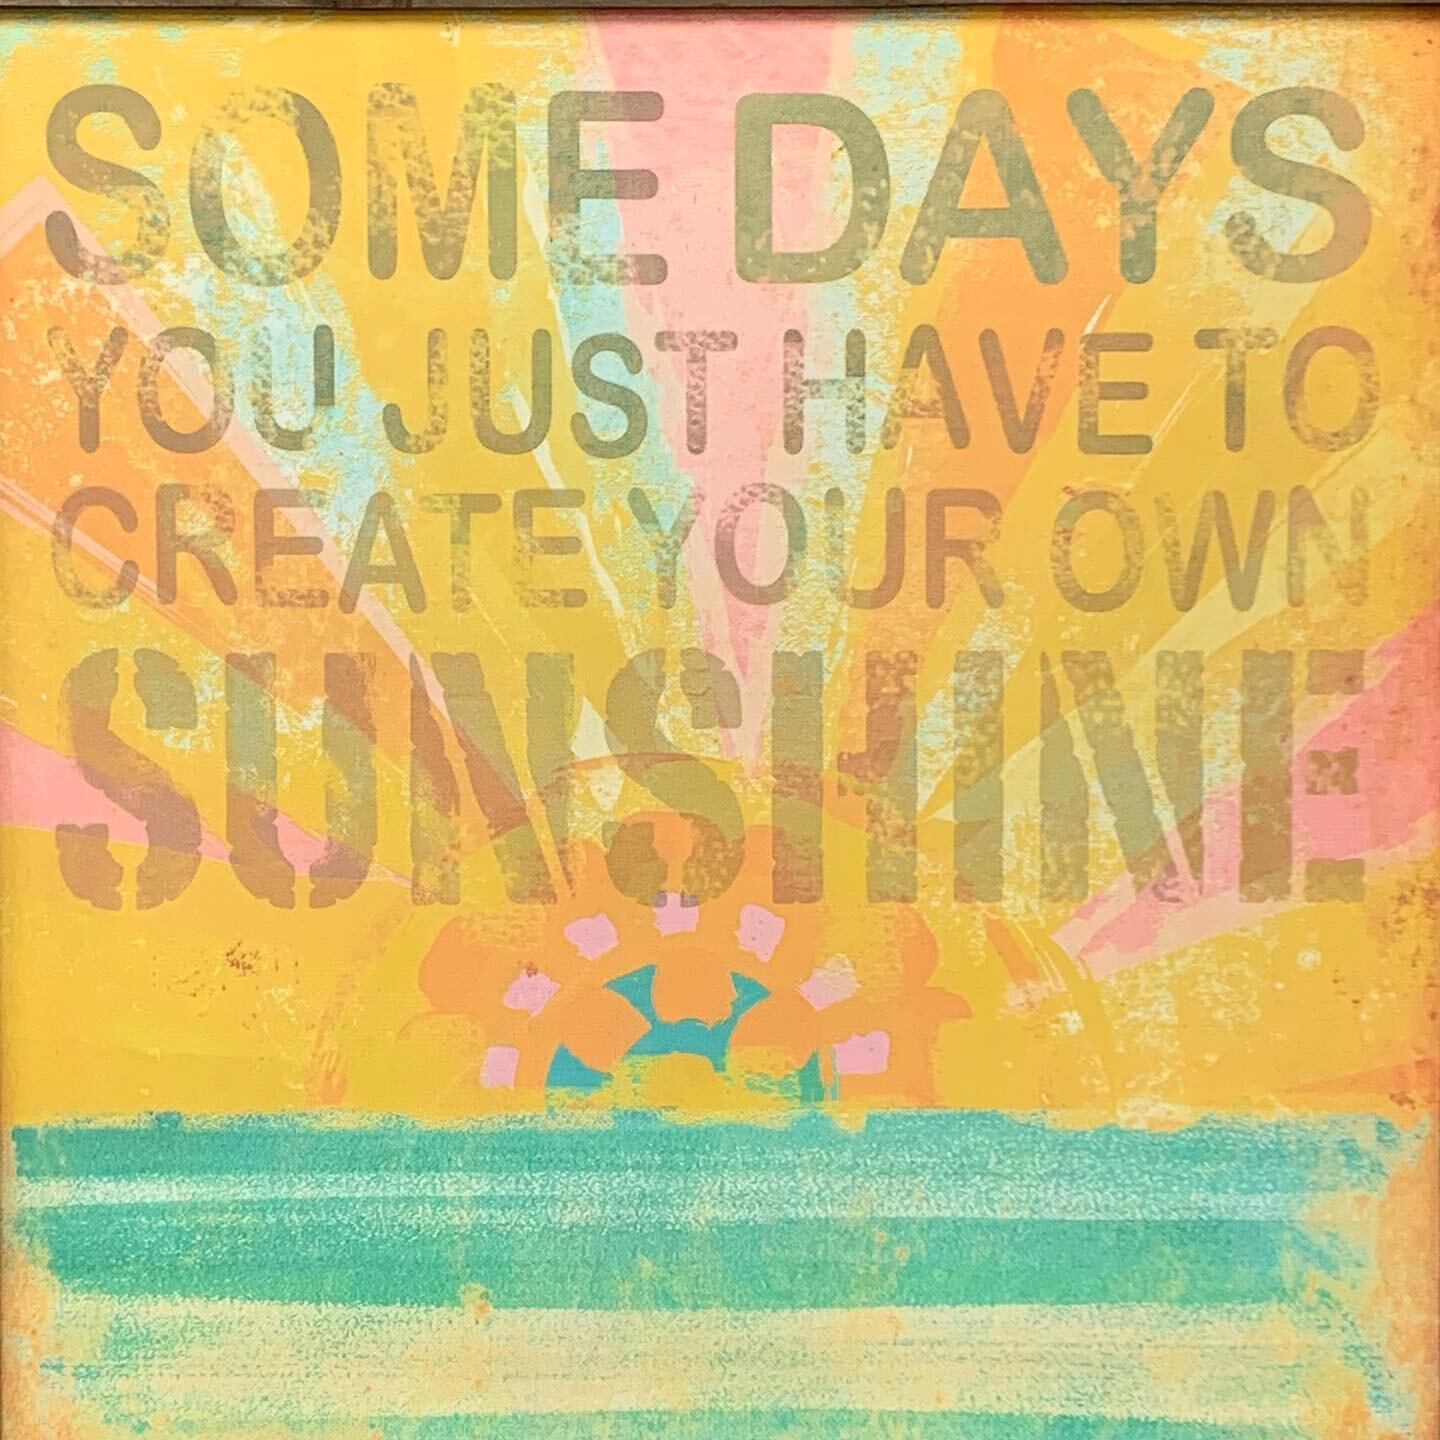 This sign hangs in my office and is a reminder that happiness ultimately comes from within us. We can decide what kind of day we&rsquo;re going to have. When it all feels like too much or too dark take a step back. Notice if you&rsquo;re focusing in 